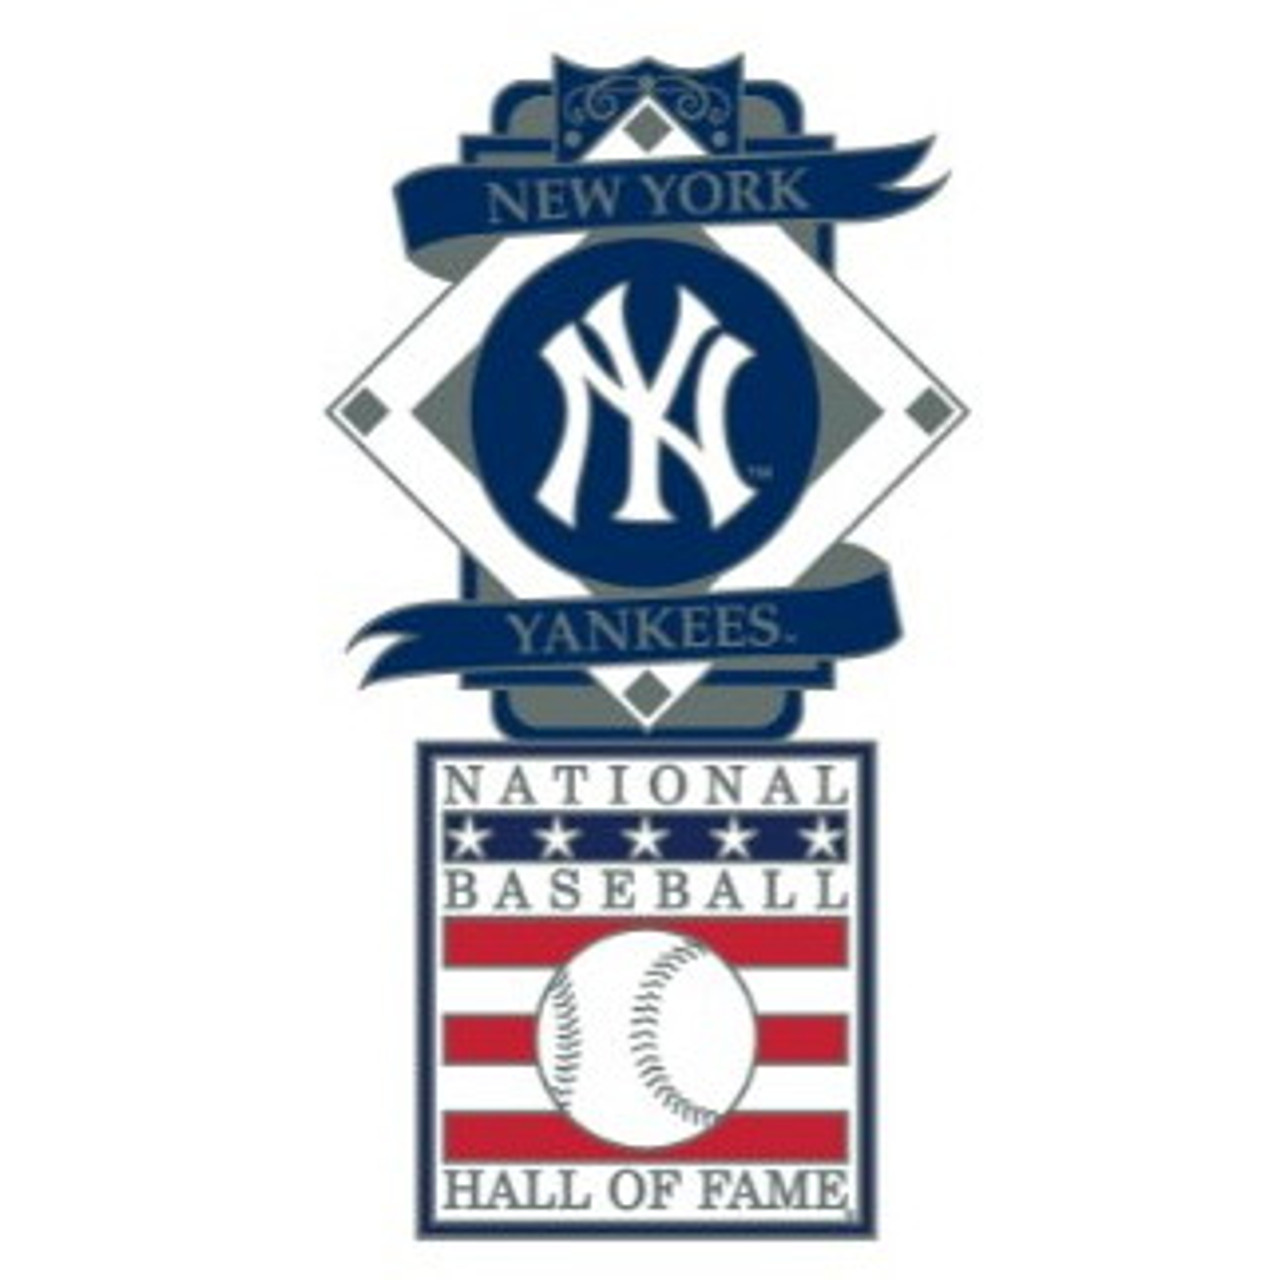 New York Yankees Baseball Hall of Fame Logo Exclusive Collector's Pin